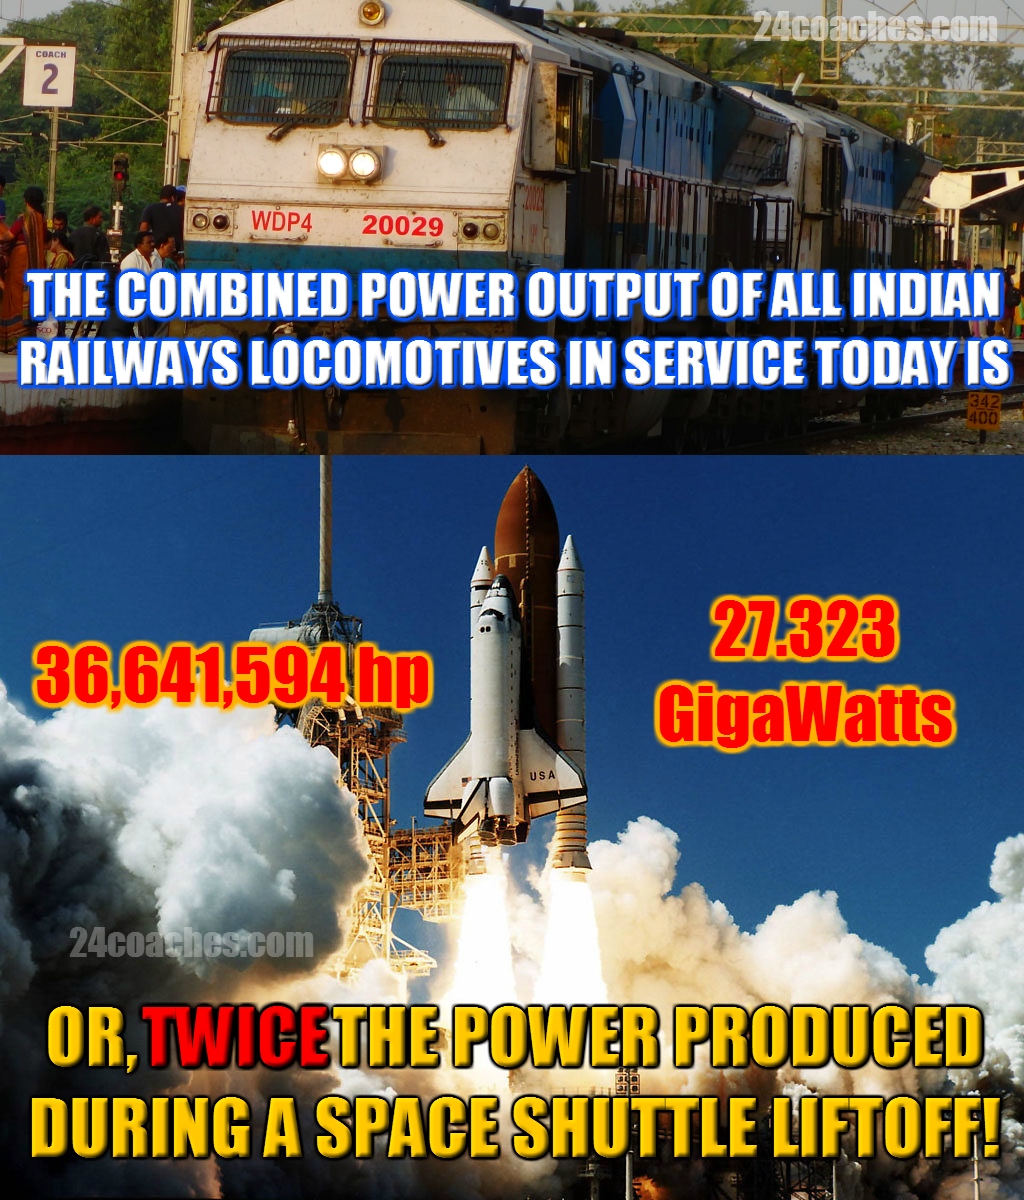 infographic showing power output of indian railway locomotives compared to space shuttle